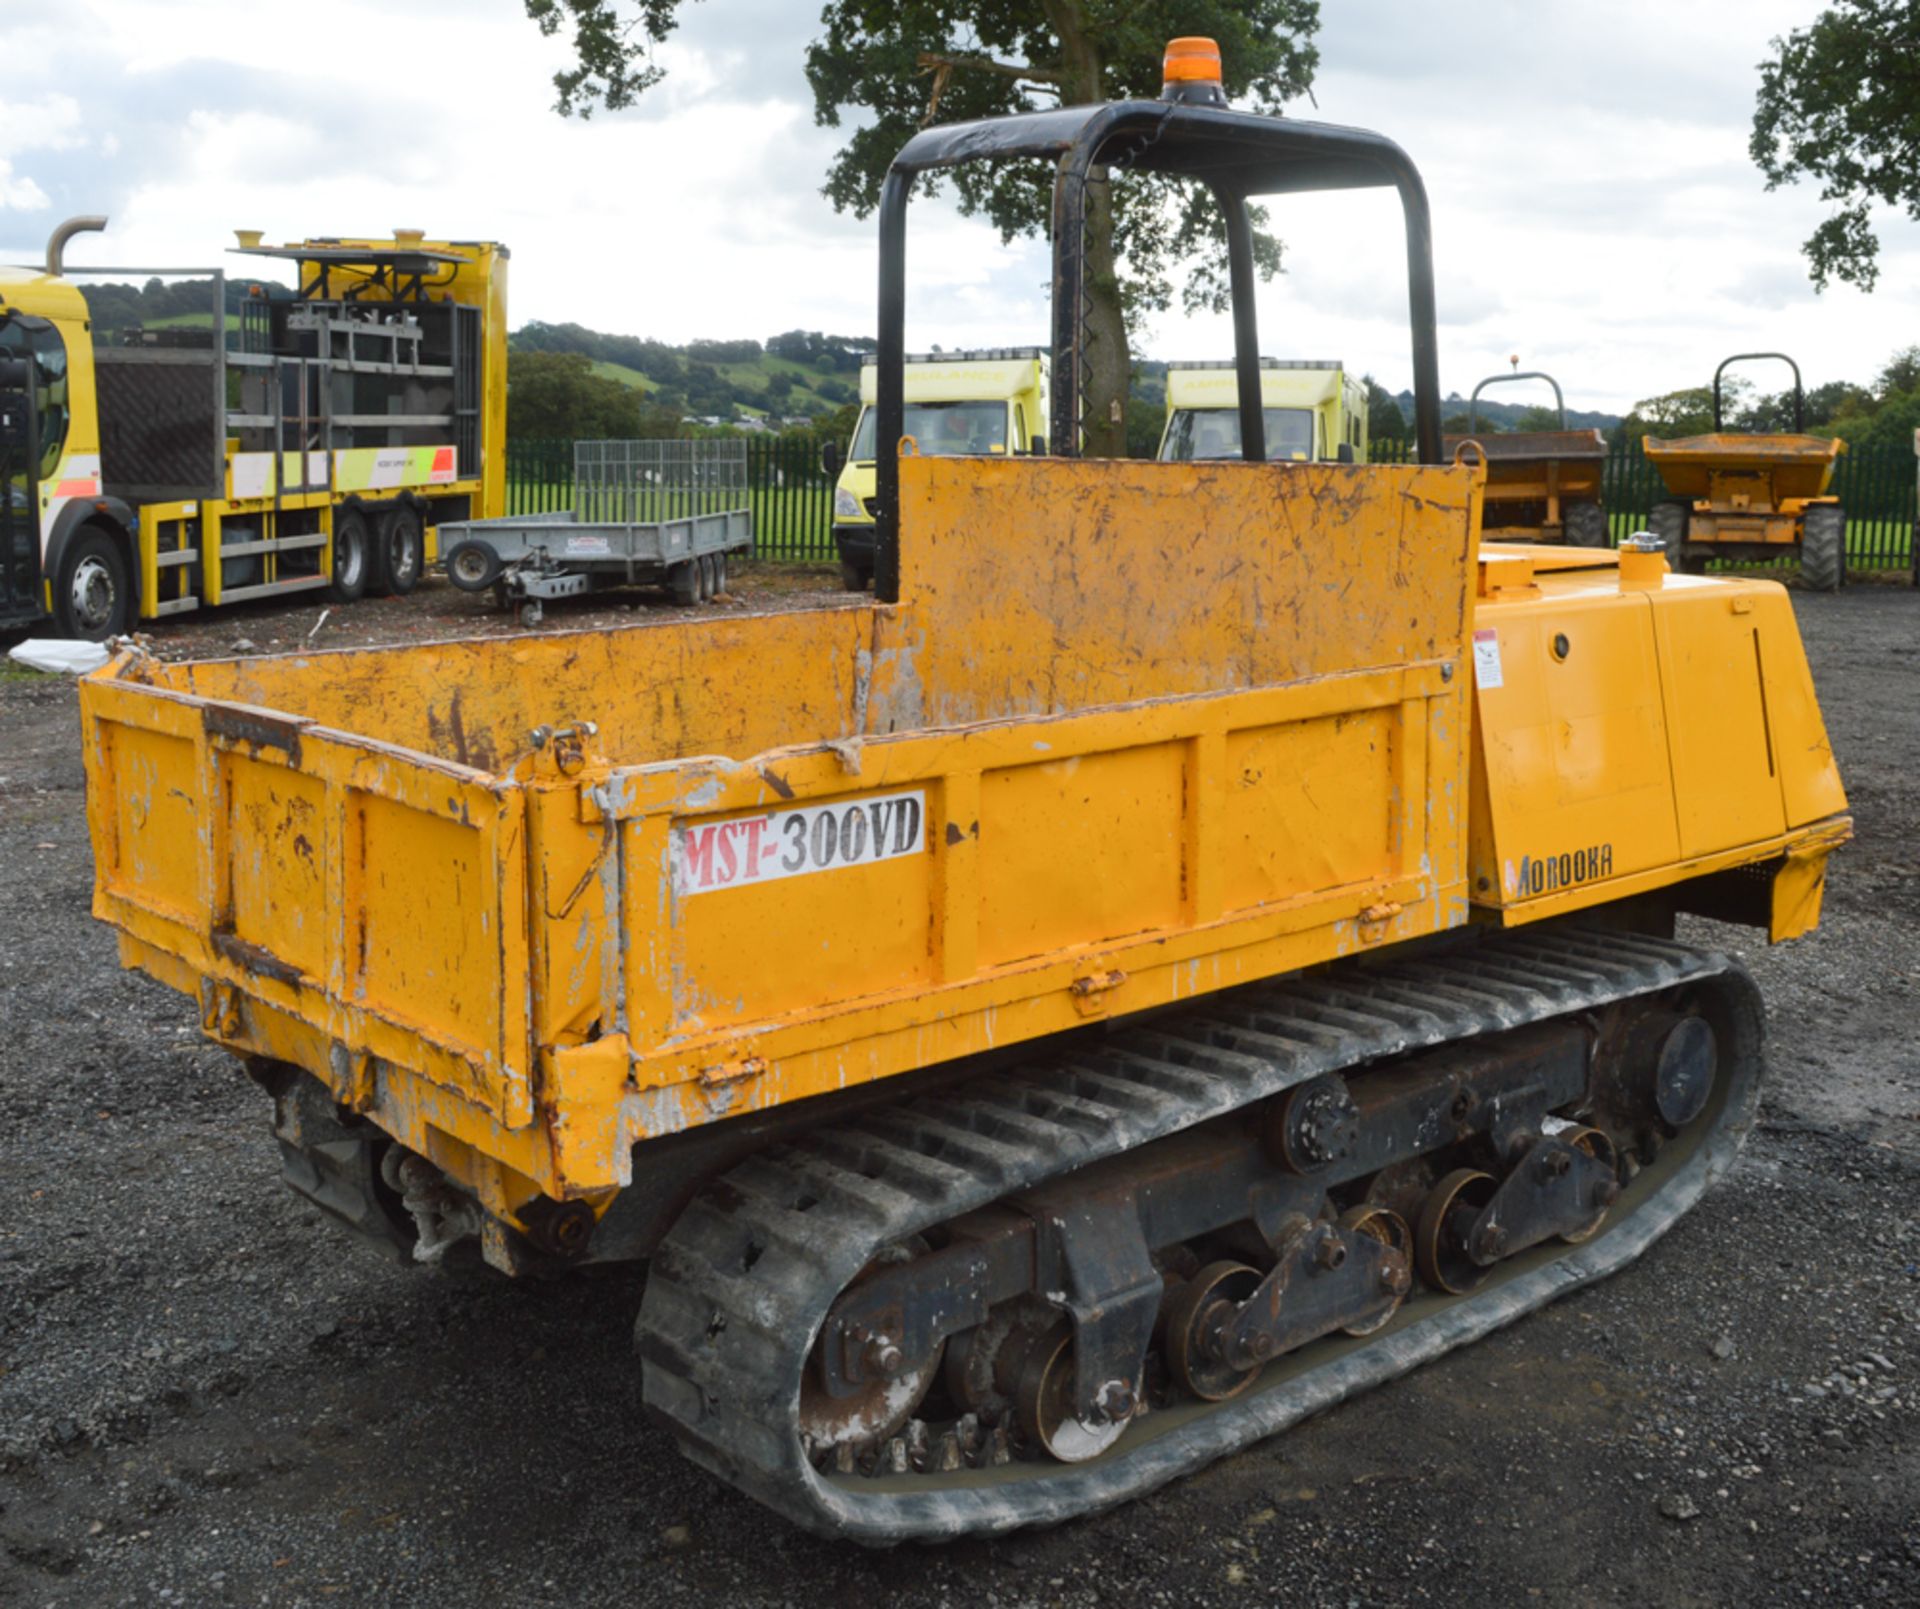 Morooka MST 300-VD 2.5 tonne rubber tracked dumper  Year: 2002 S/N: 3481 Recorded hours: 1103 - Image 4 of 9